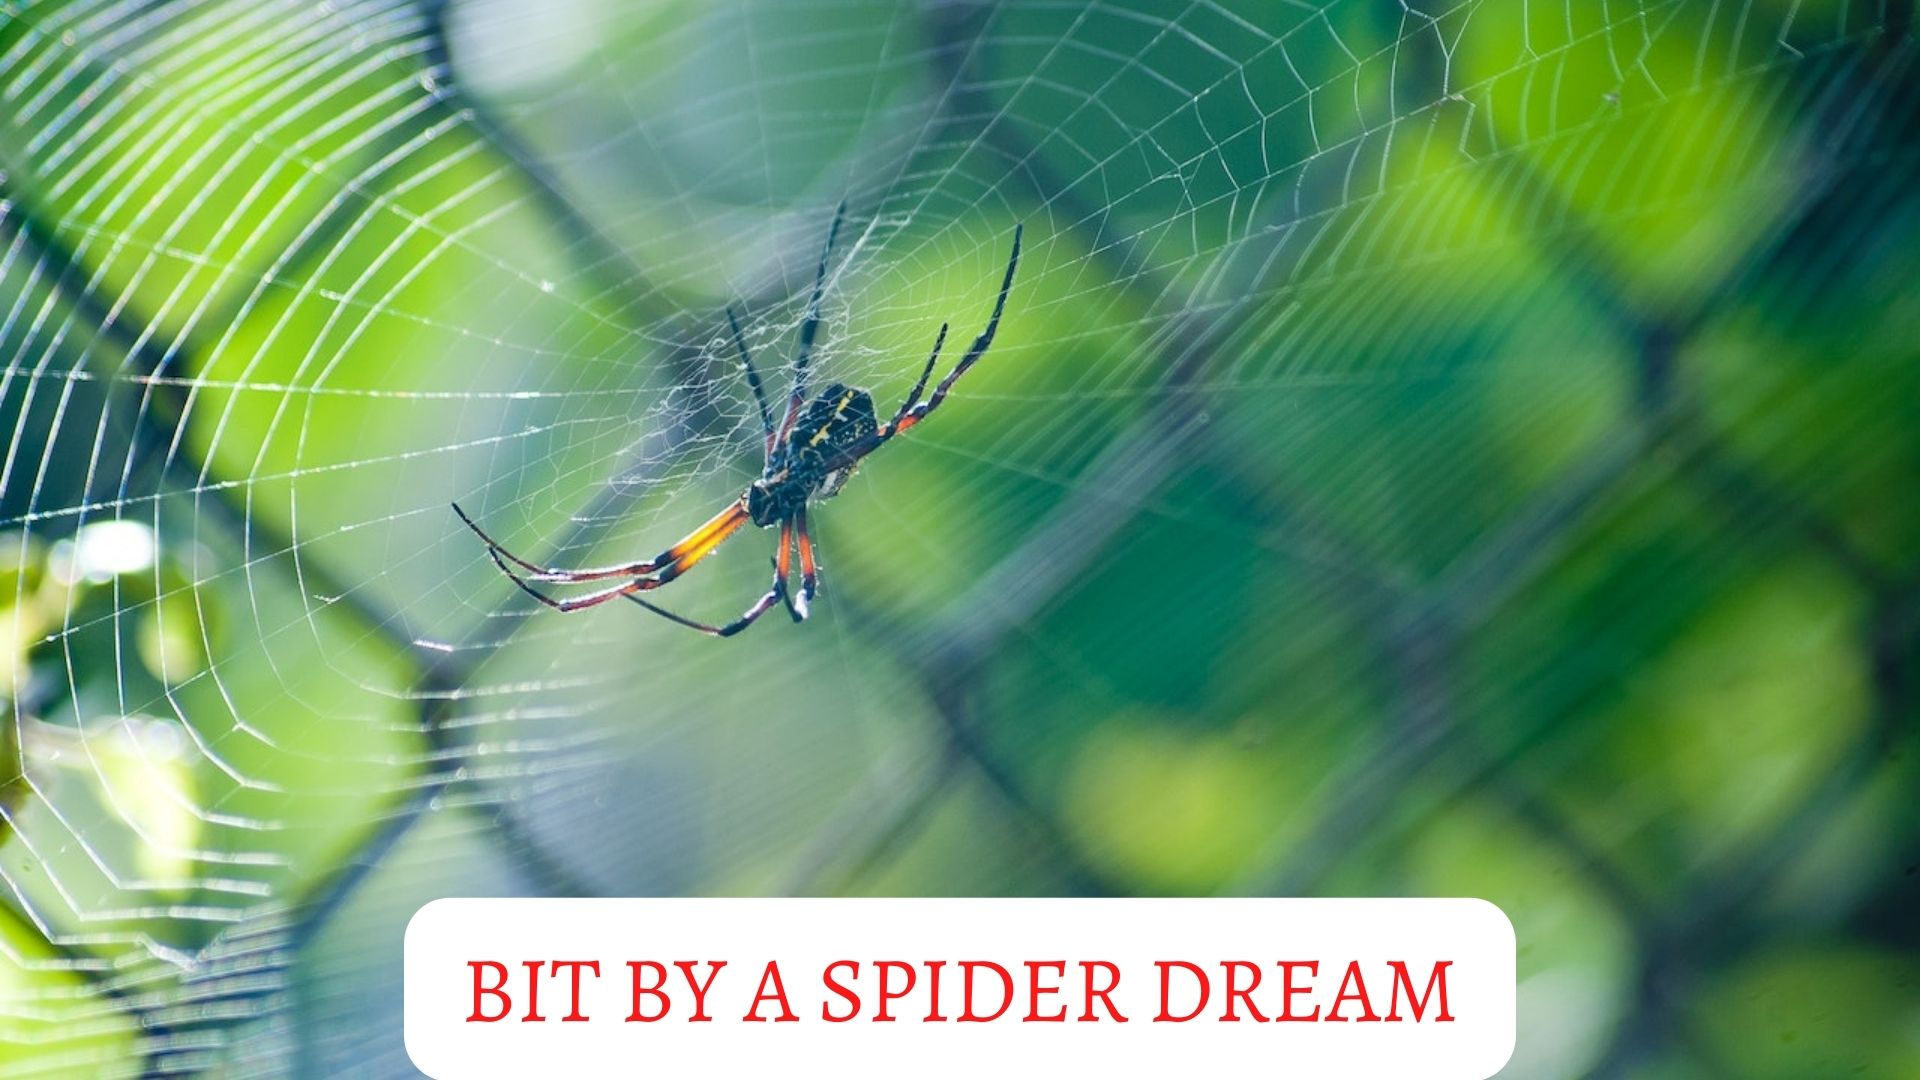 Bit By A Spider Dream Meaning - Dangerous Possibilities And Lurking Evil